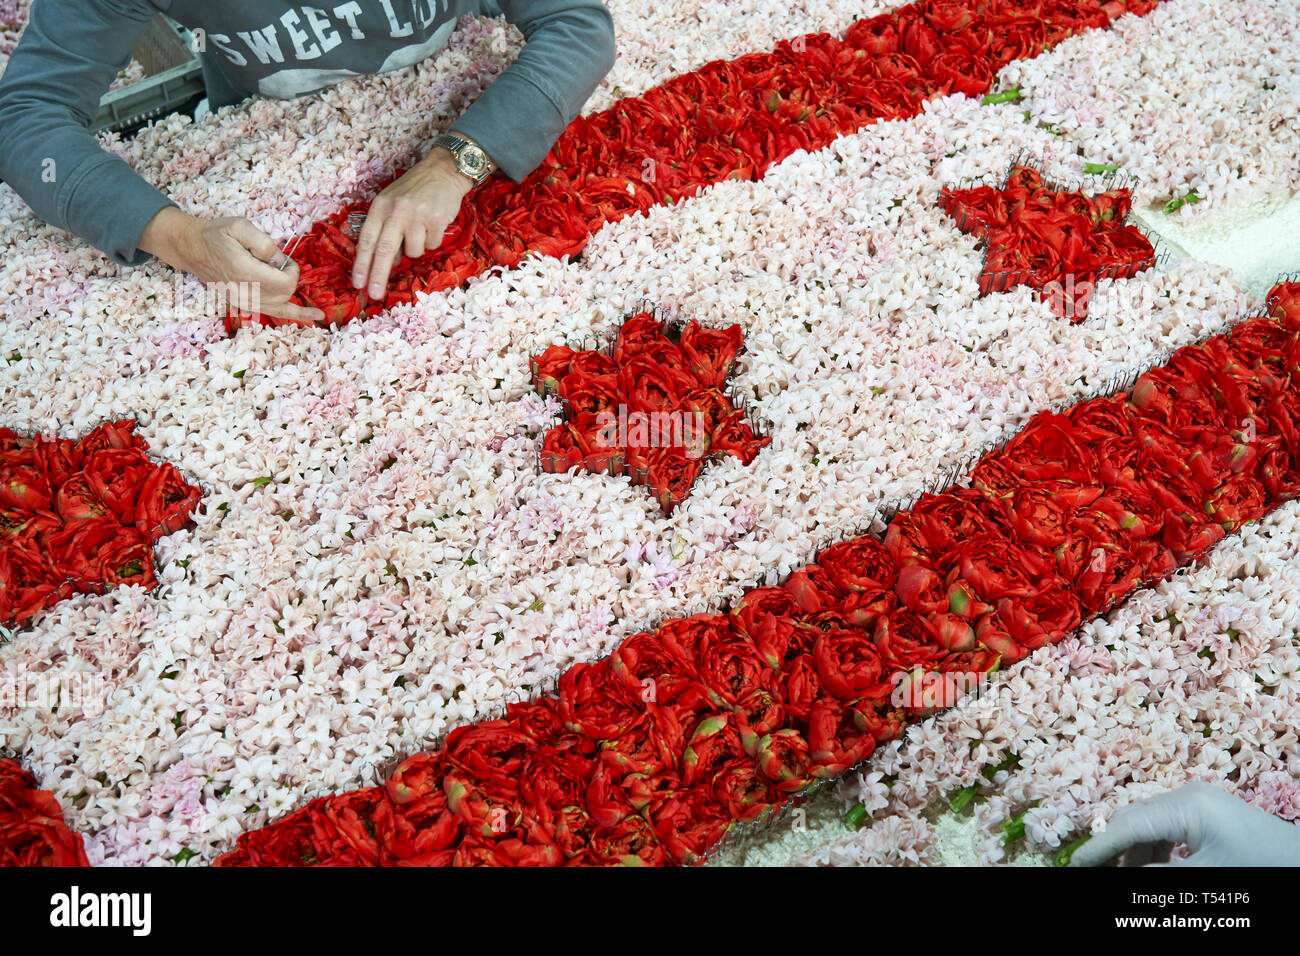 Participants cover with flowers the floats that will participate in the parade of the flower producing region in Holland. Stock Photo